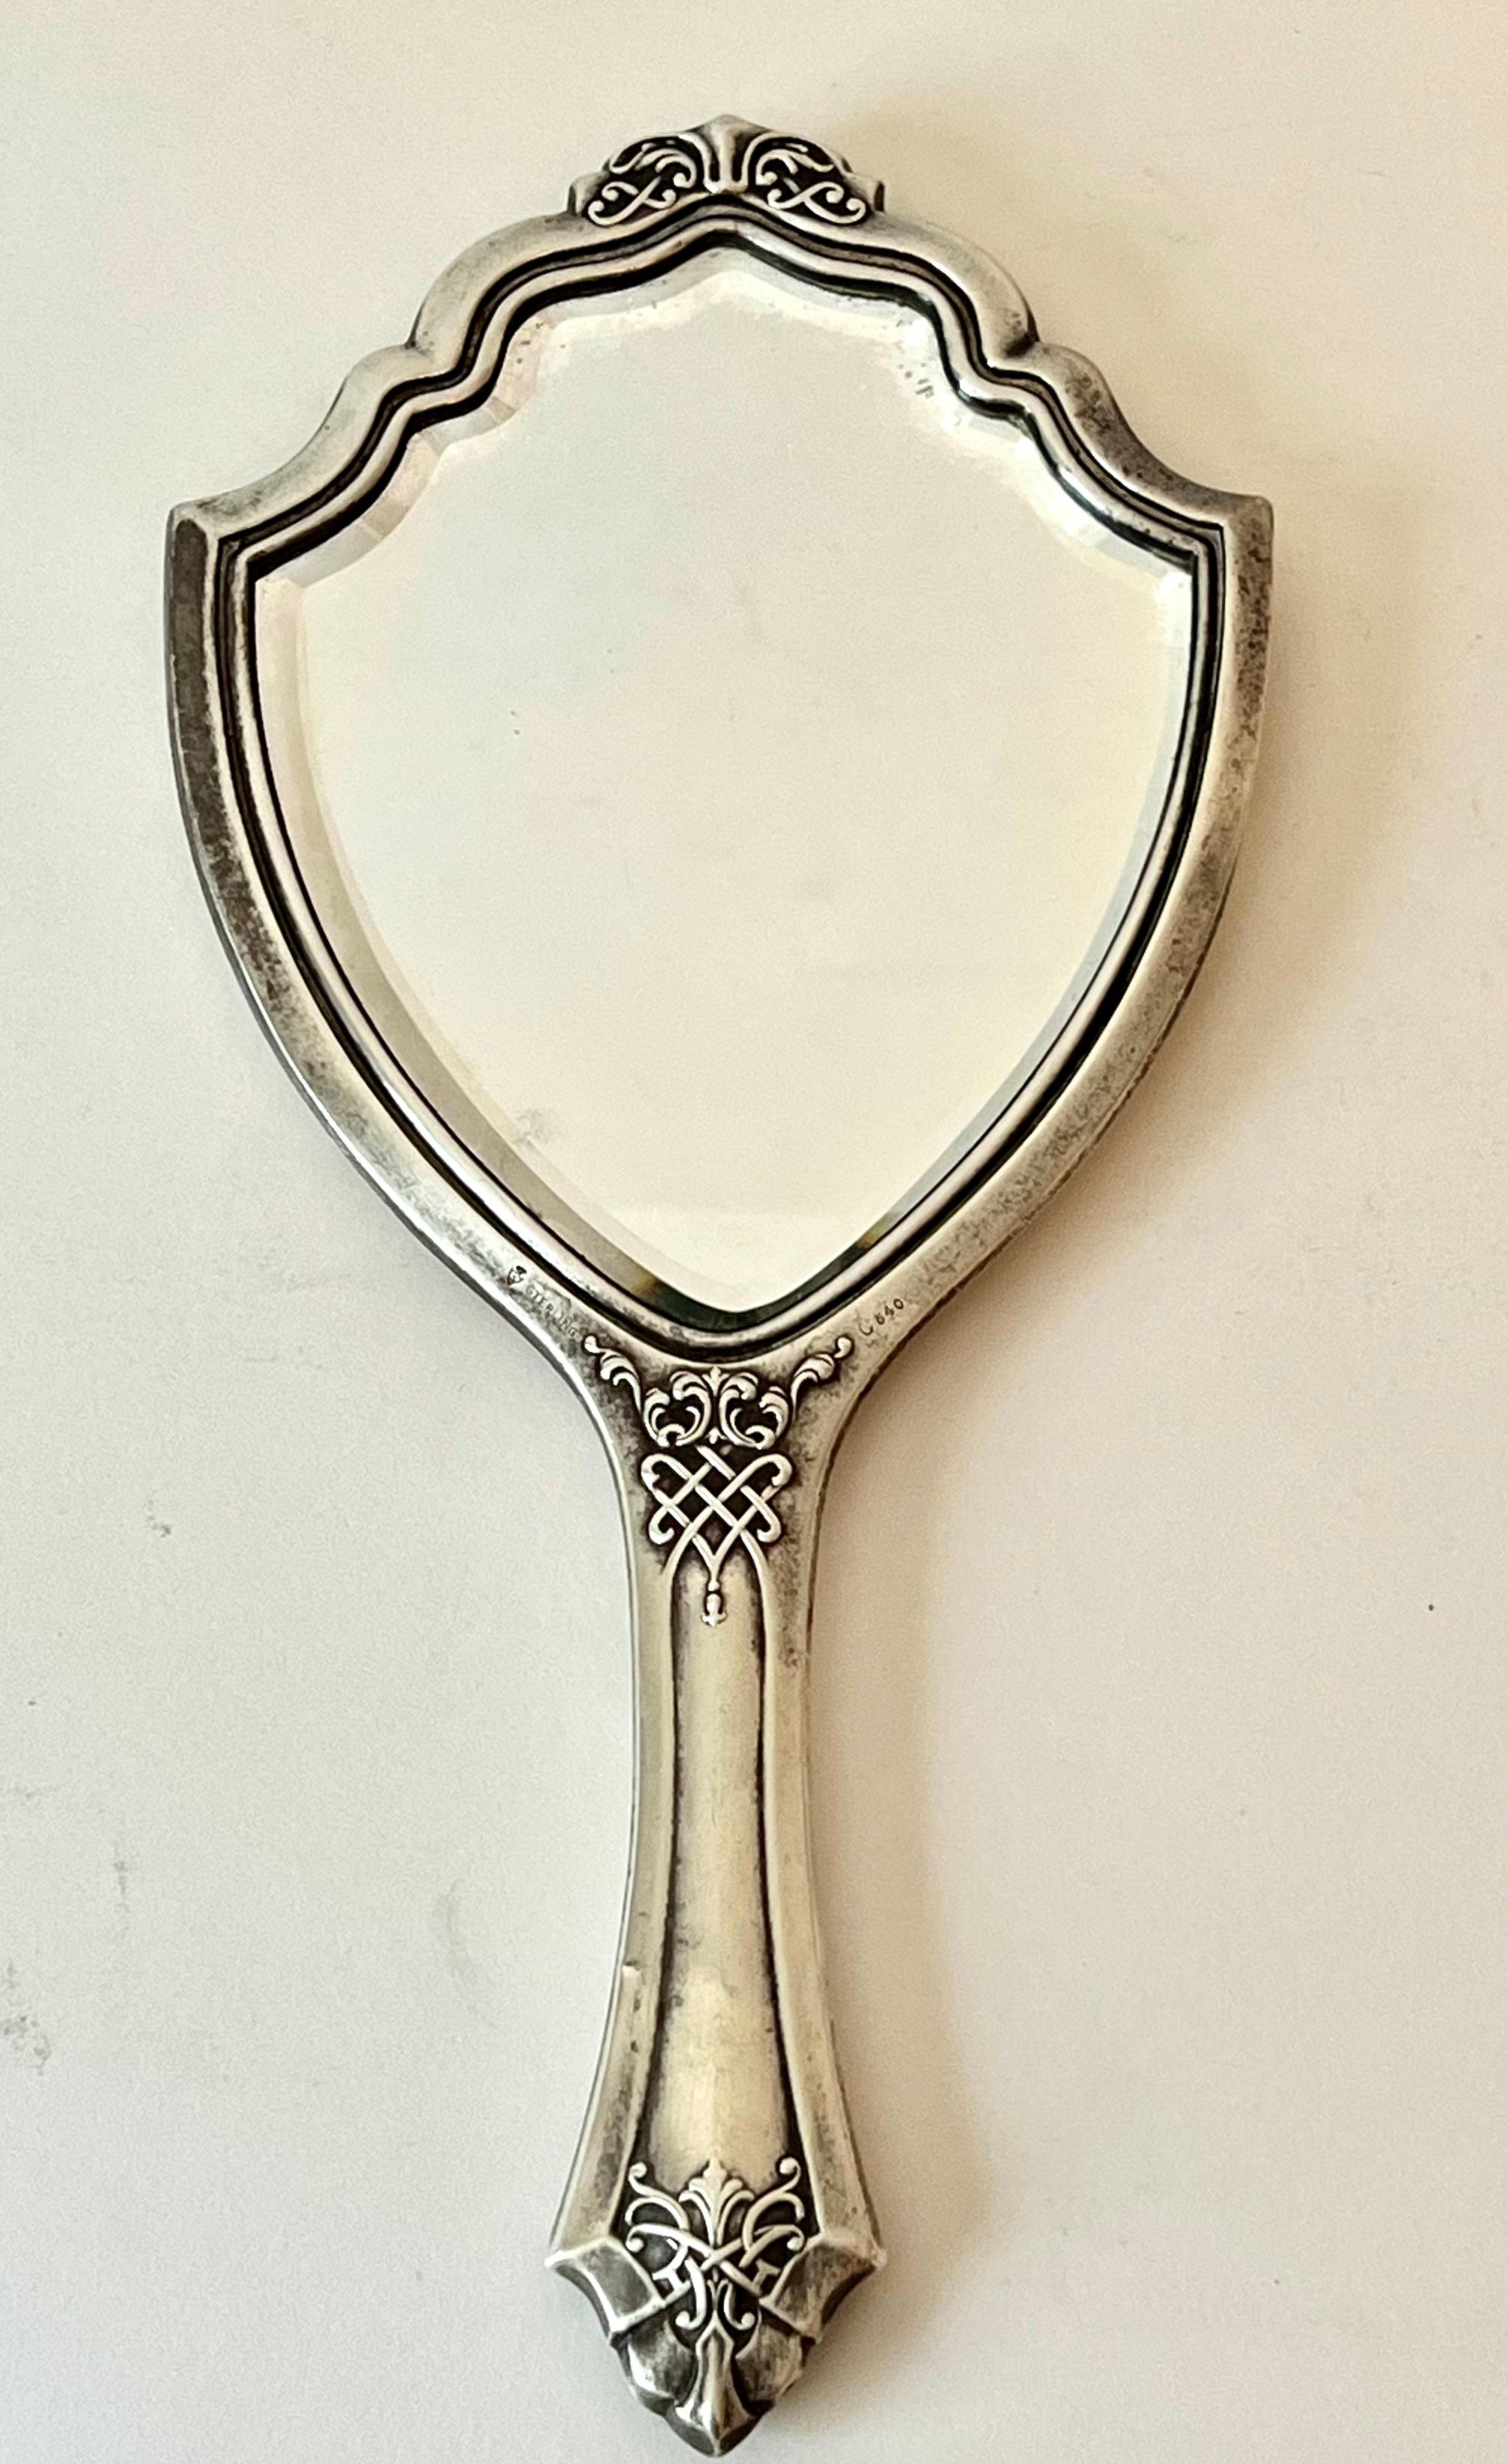 A beautifully designed Sterling Hand mirror with Art Nouveau design.  The patination is wonderful with some tarnish and marred areas due to age.   a compliment to any vanity or dressing area.   

The mirror is beveled enhancing the design -